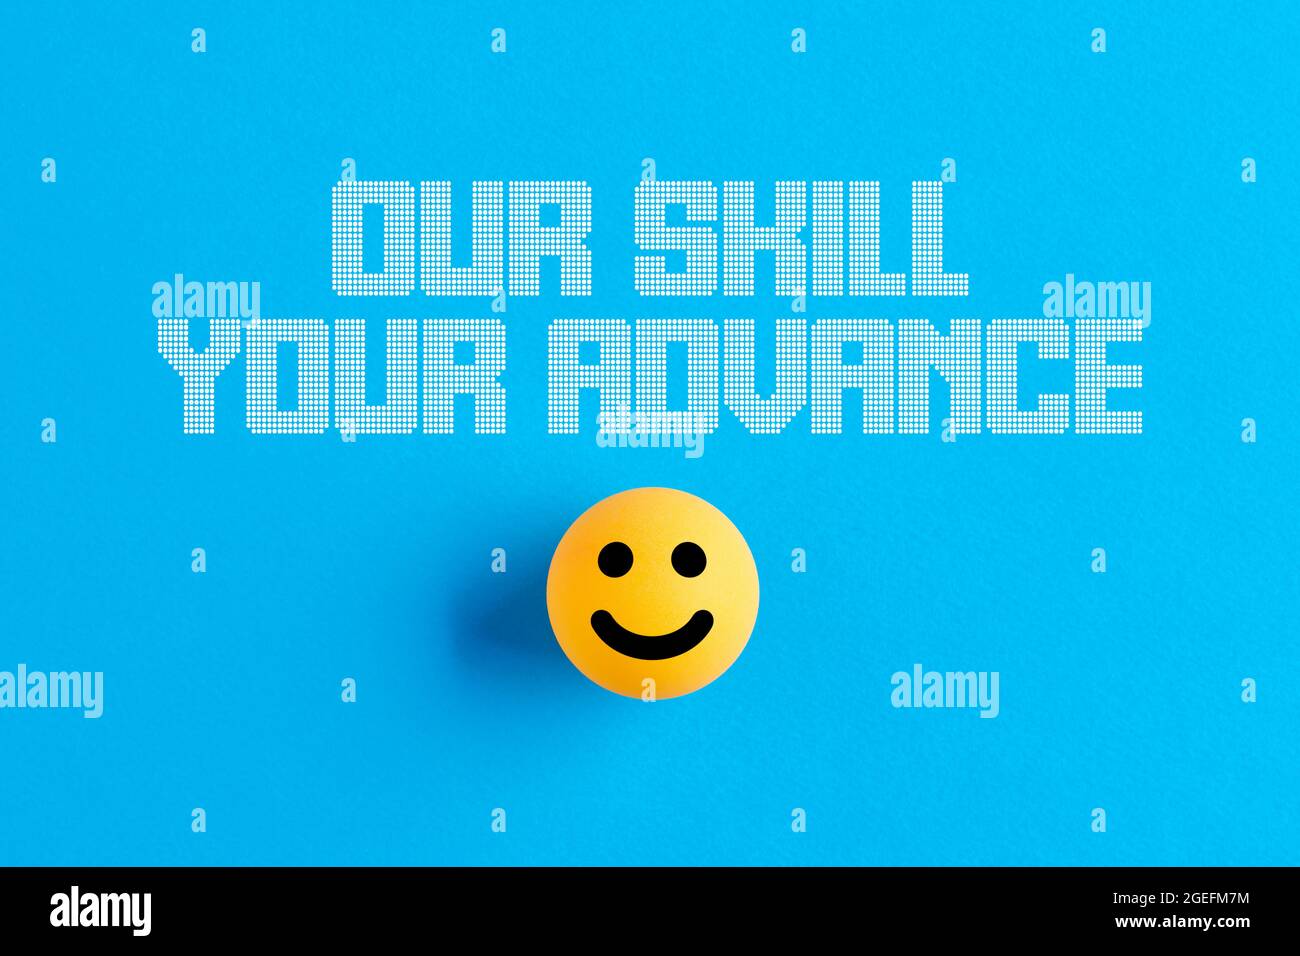 Smiling face icon on a ball with the message our skill your advance. Business consultancy concept. Stock Photo